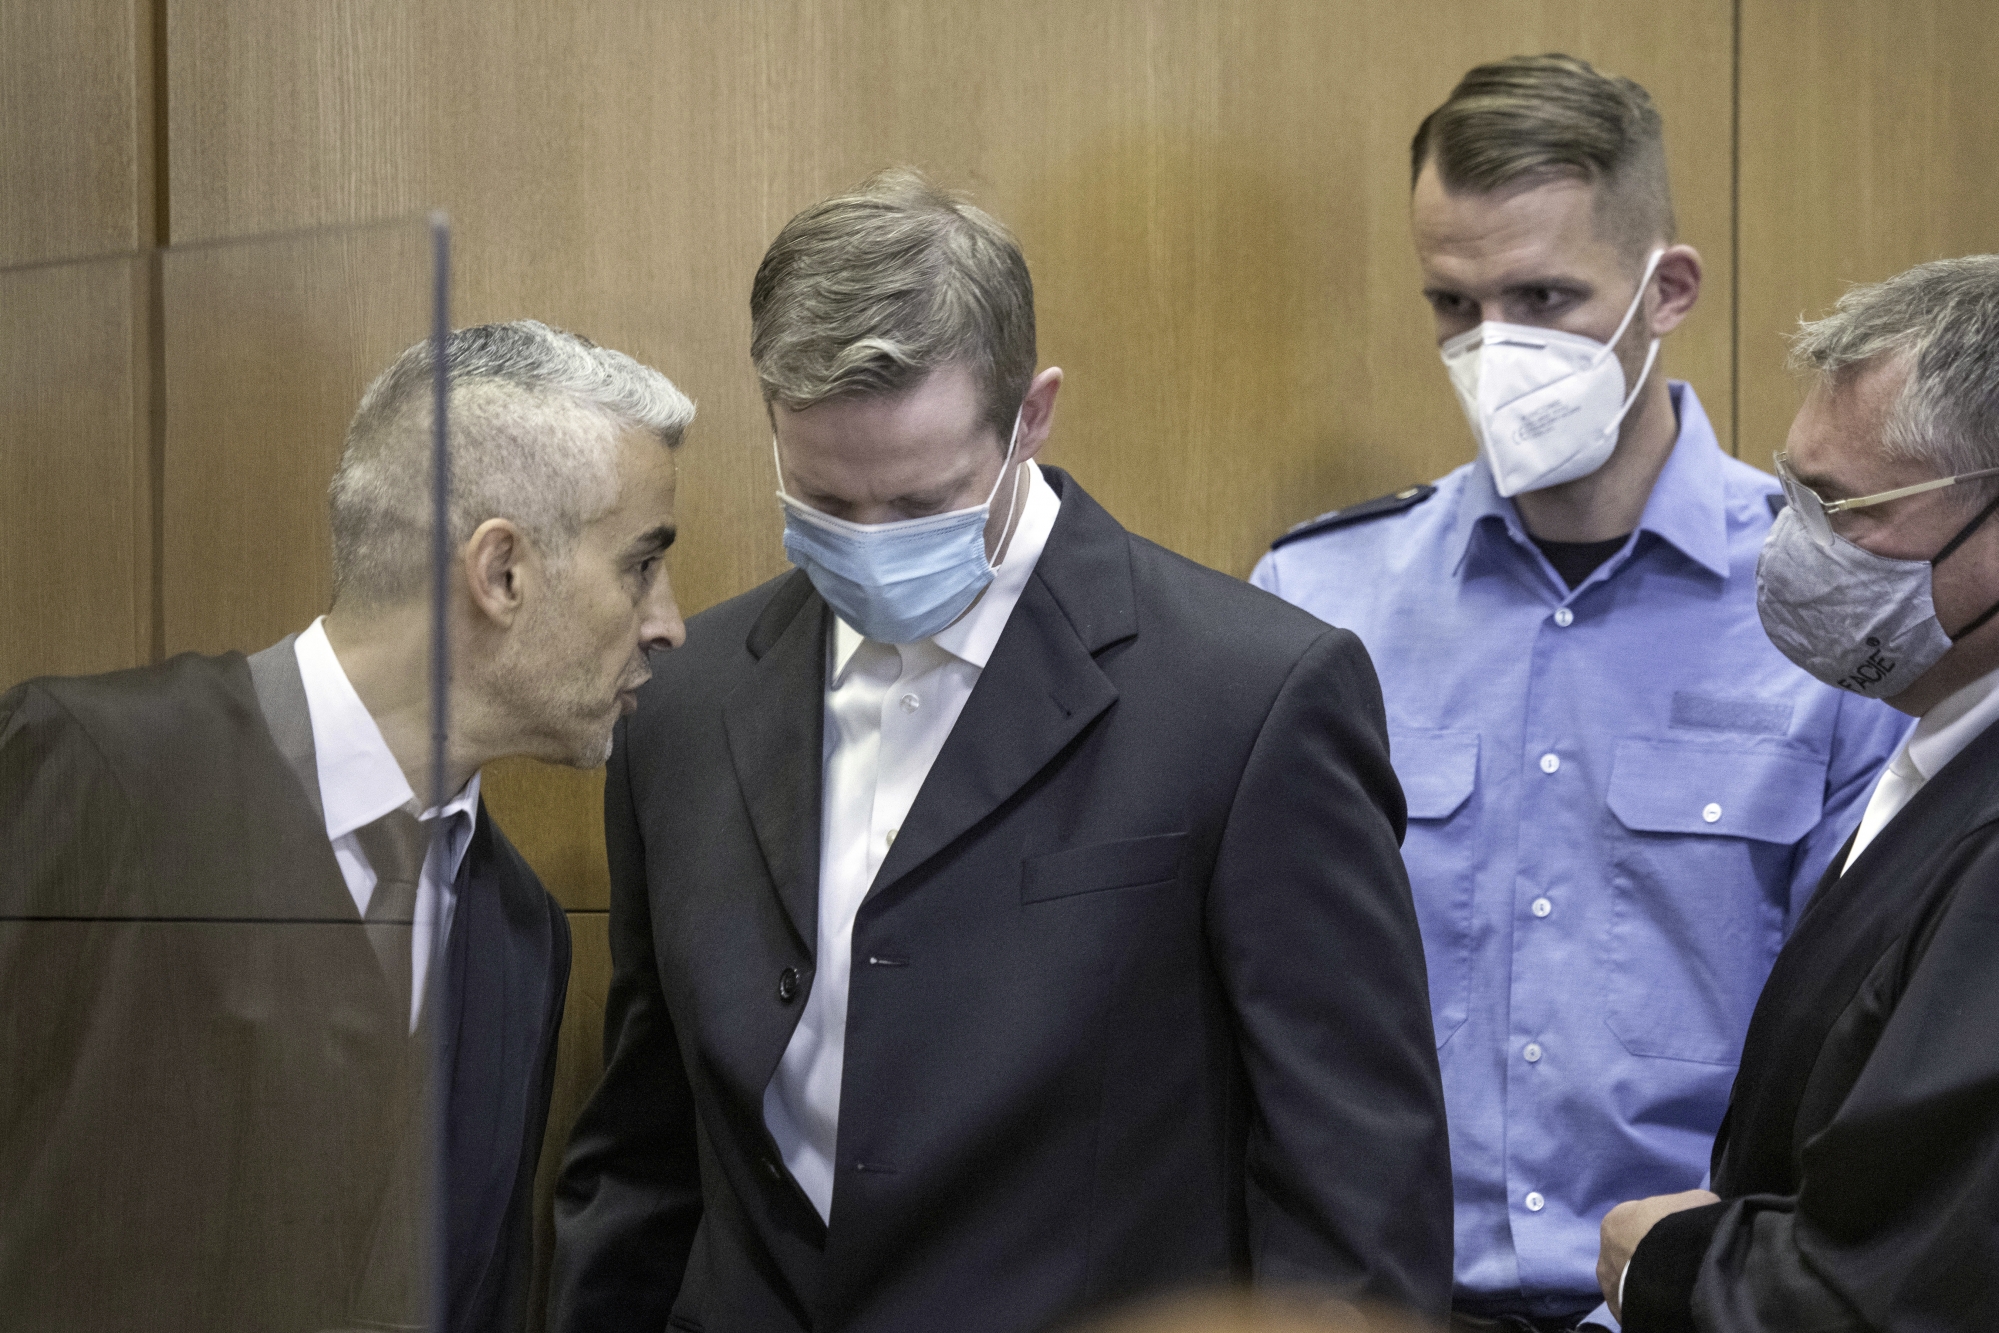 Stephan Ernst, second left, talks to his lawyers Mustafa Kaplan, left, and Frank Henning, right, after he arrived in the courtroom of the Higher Regional Court on the first day of the trial, in Frankfurt, Germany, Tuesday, June 16, 2020. A German court will begin hearing the case against two far-right extremists accused of killing a regional politician. The execution-style slaying of Walter Luebcke shocked the country last year. Stephan Ernst, a 46-year-oldÂ with previous convictions for violent anti-migrant crimes, will appear in the Frankfurt regional court accused of murder, attempted murder, serious bodily harm and firearms offenses. (Thomas Lohnes/Pool Photo via AP)